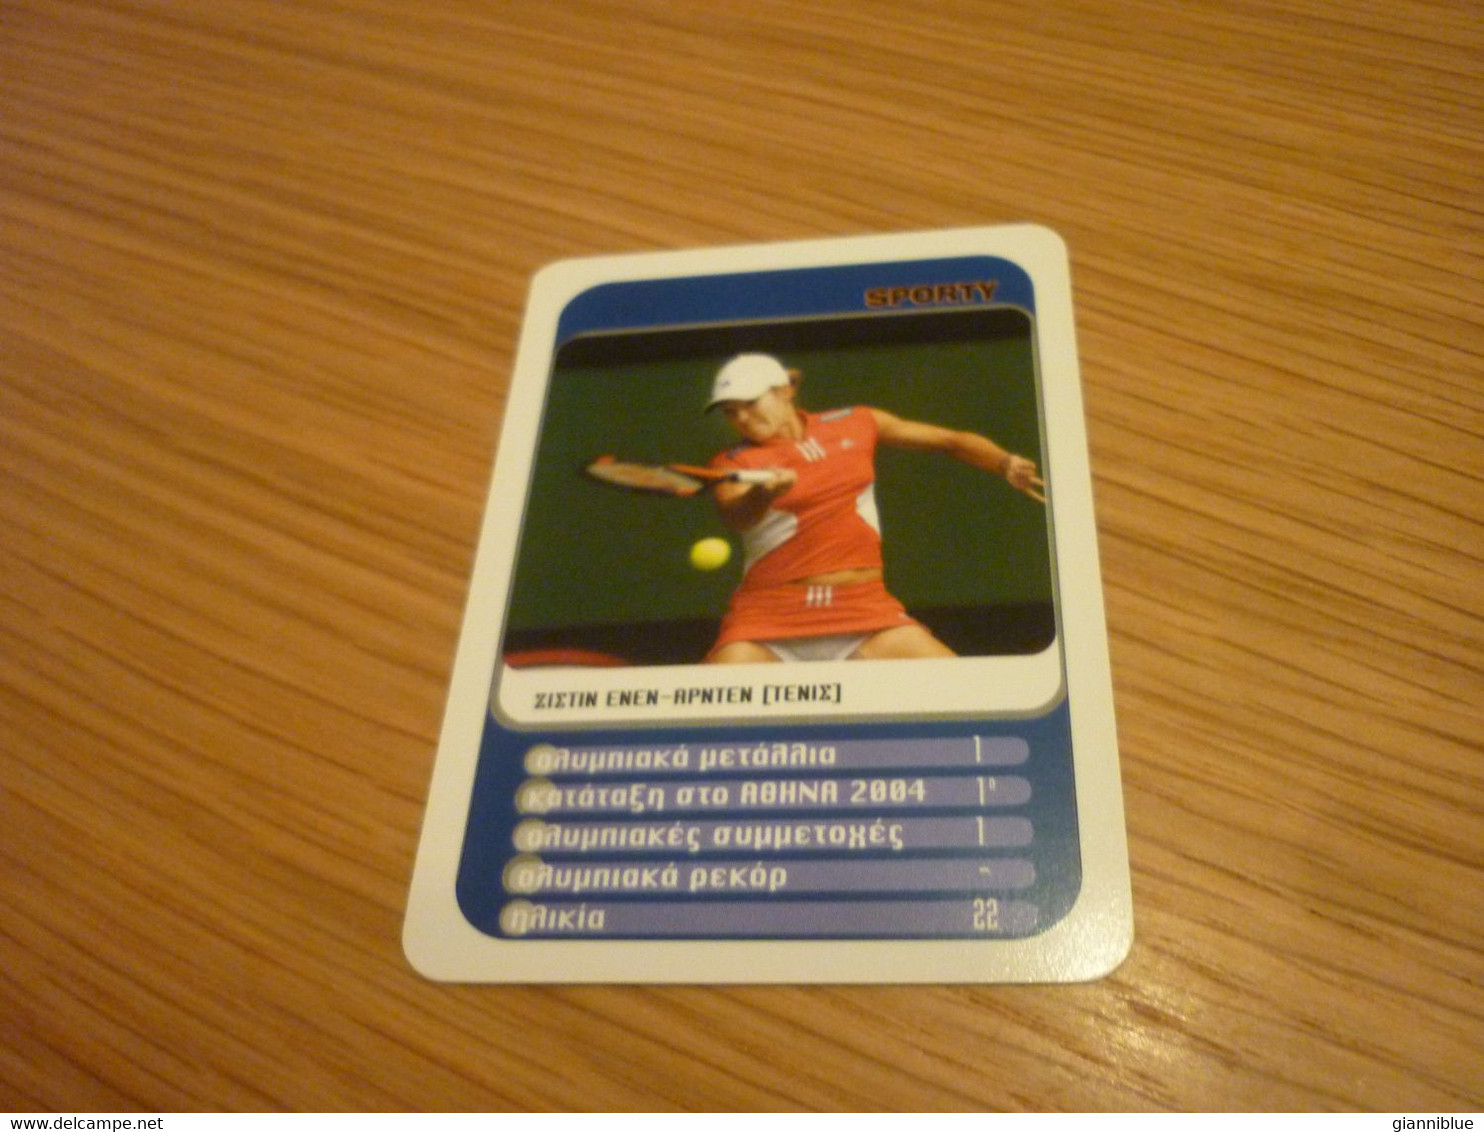 Justine Henin-Hardenne Rookie Belgian Tennis Player Athens 2004 Olympic Games Medalist Greece Greek Trading Card - Trading Cards